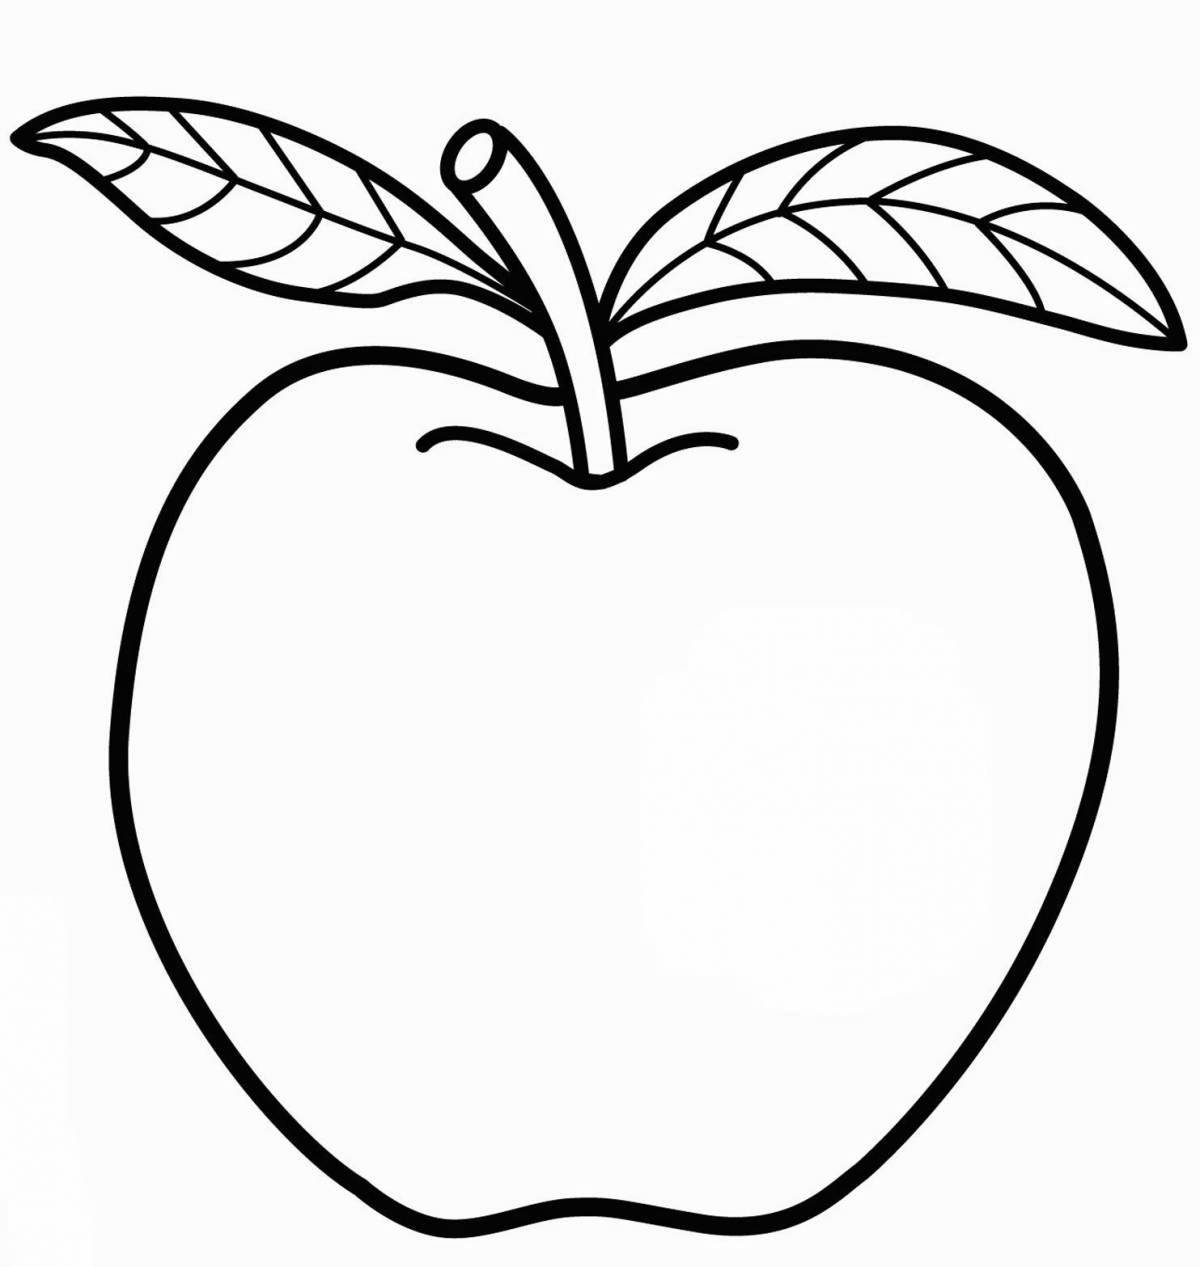 Delightful apple coloring book for children 3-4 years old